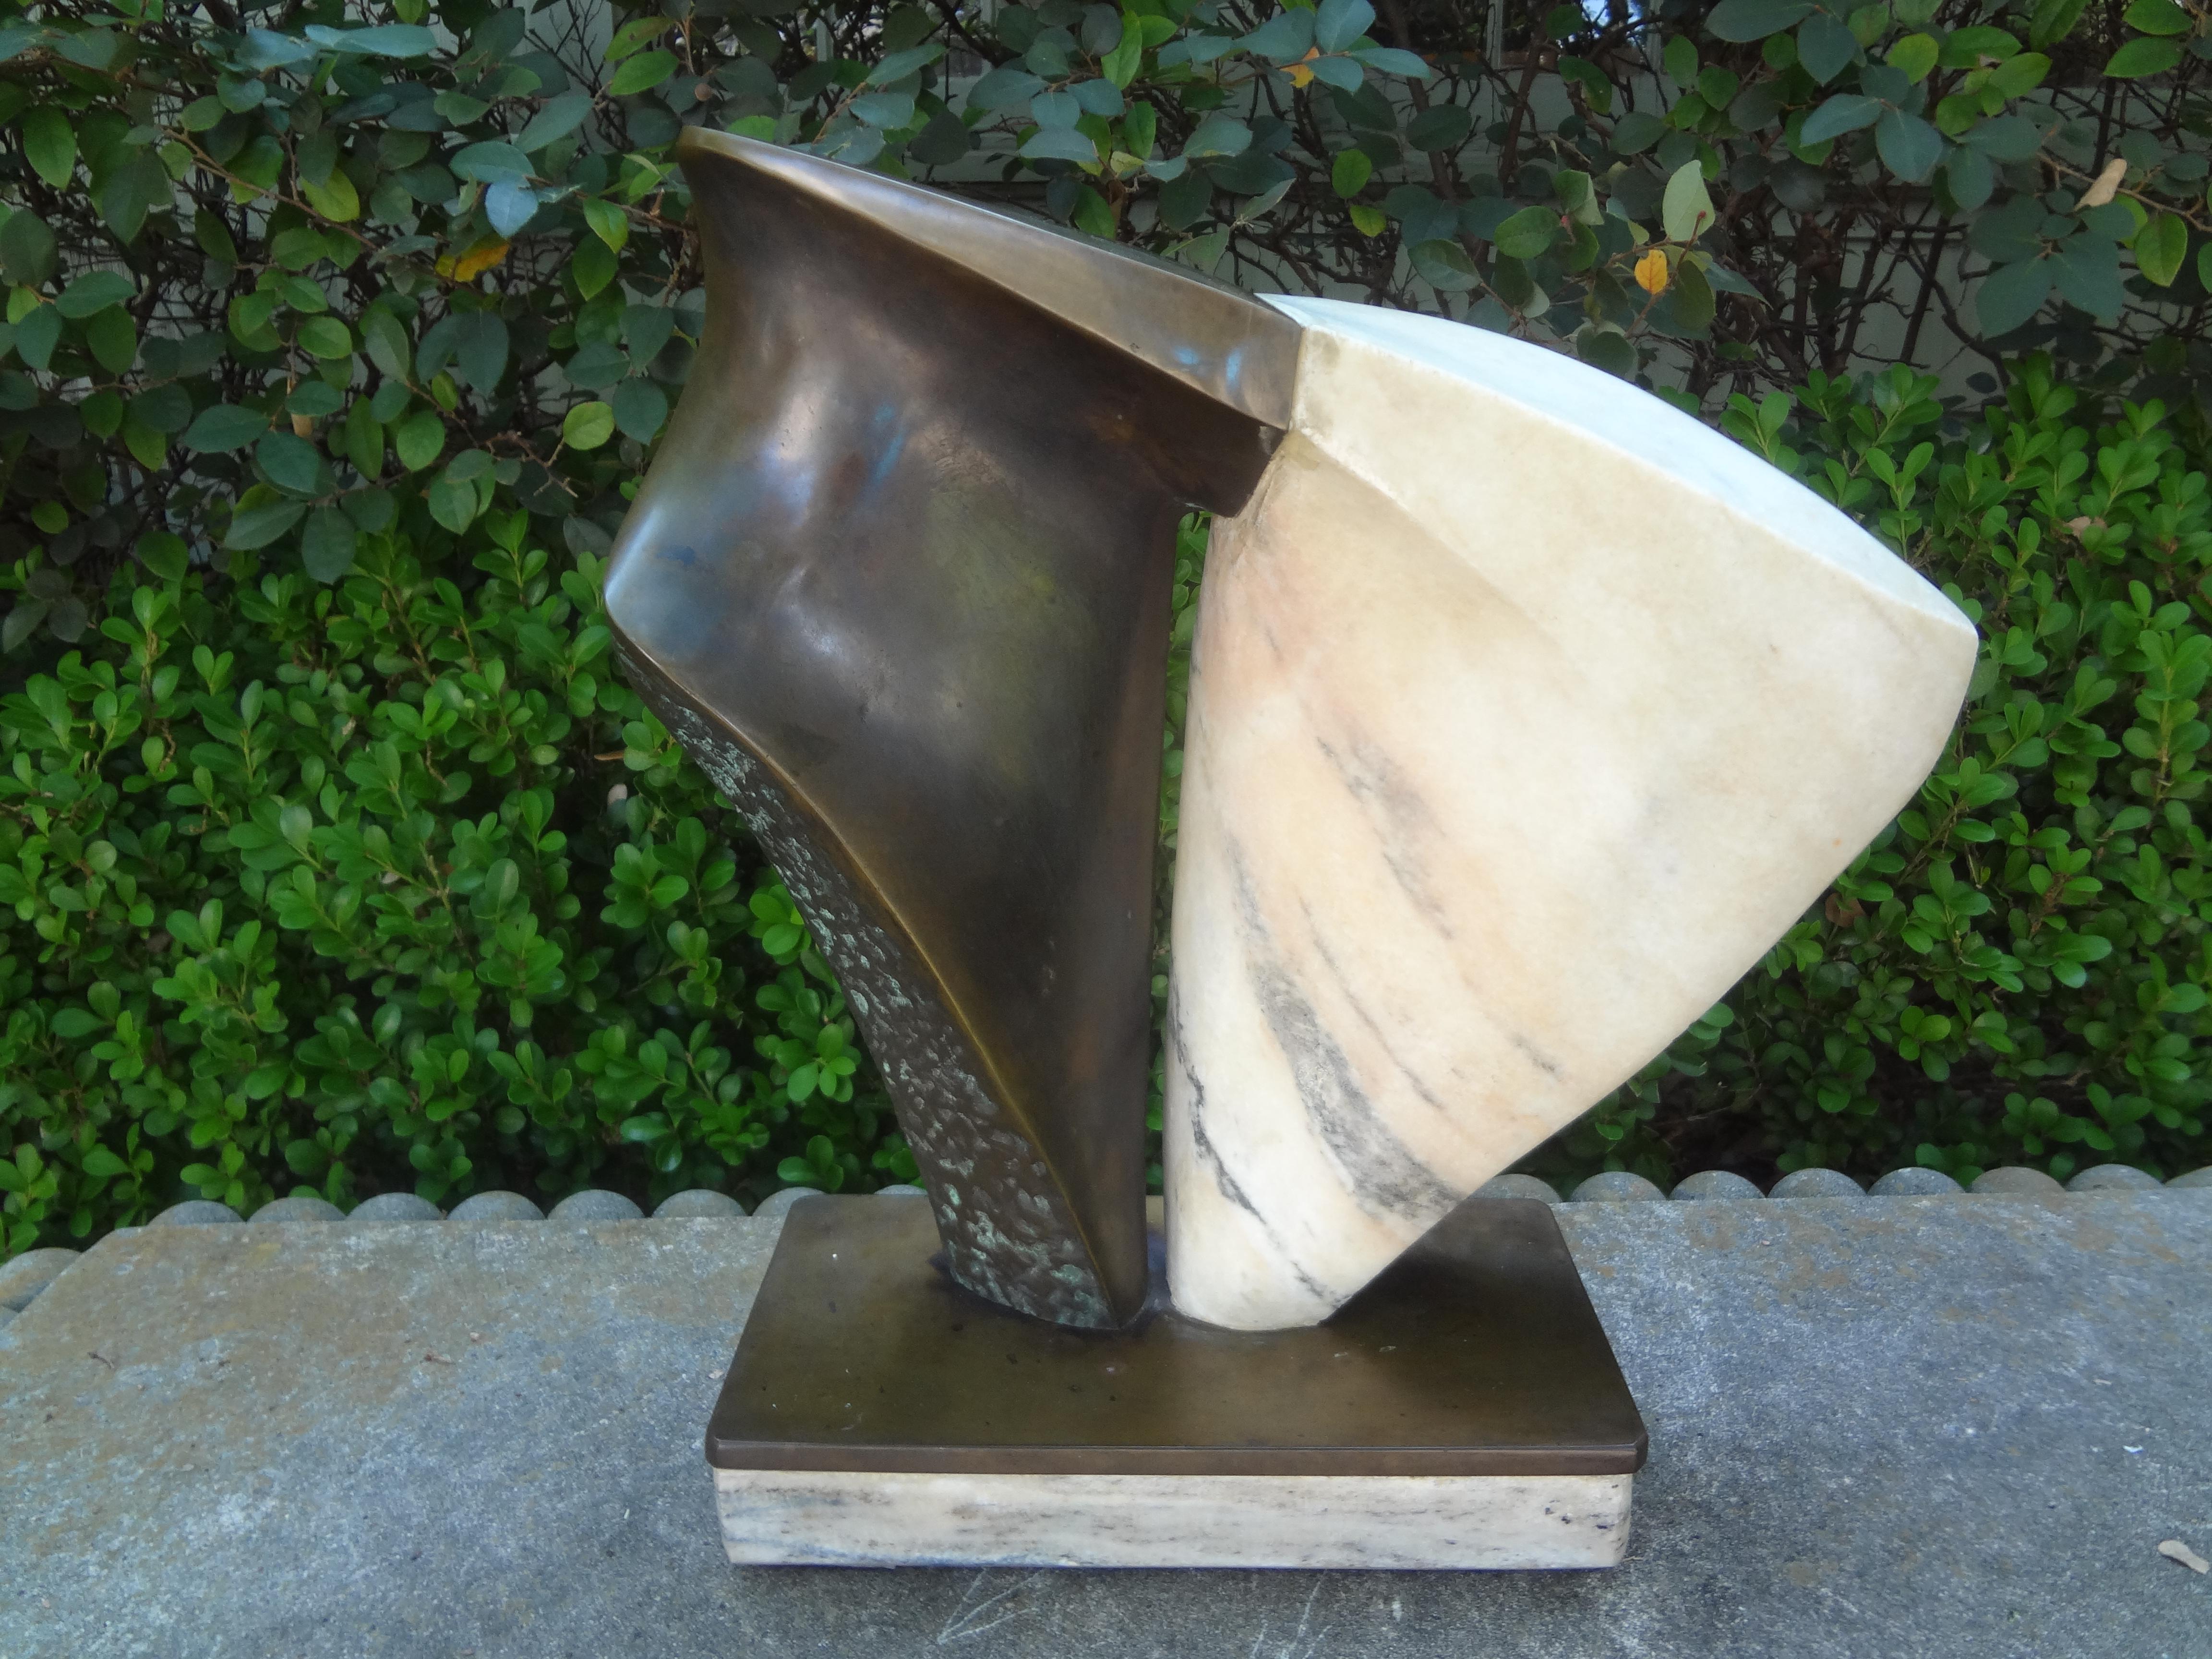 Modernist Bronze And Marble Abstract Sculpture.
Well executed and well cast 20th century bronze and marble modernist abstract sculpture.

Stan Wysocki, born in 1949 in Elk, is a polish sculptor. The artist studied at the Beaux-Arts academy in Poznan